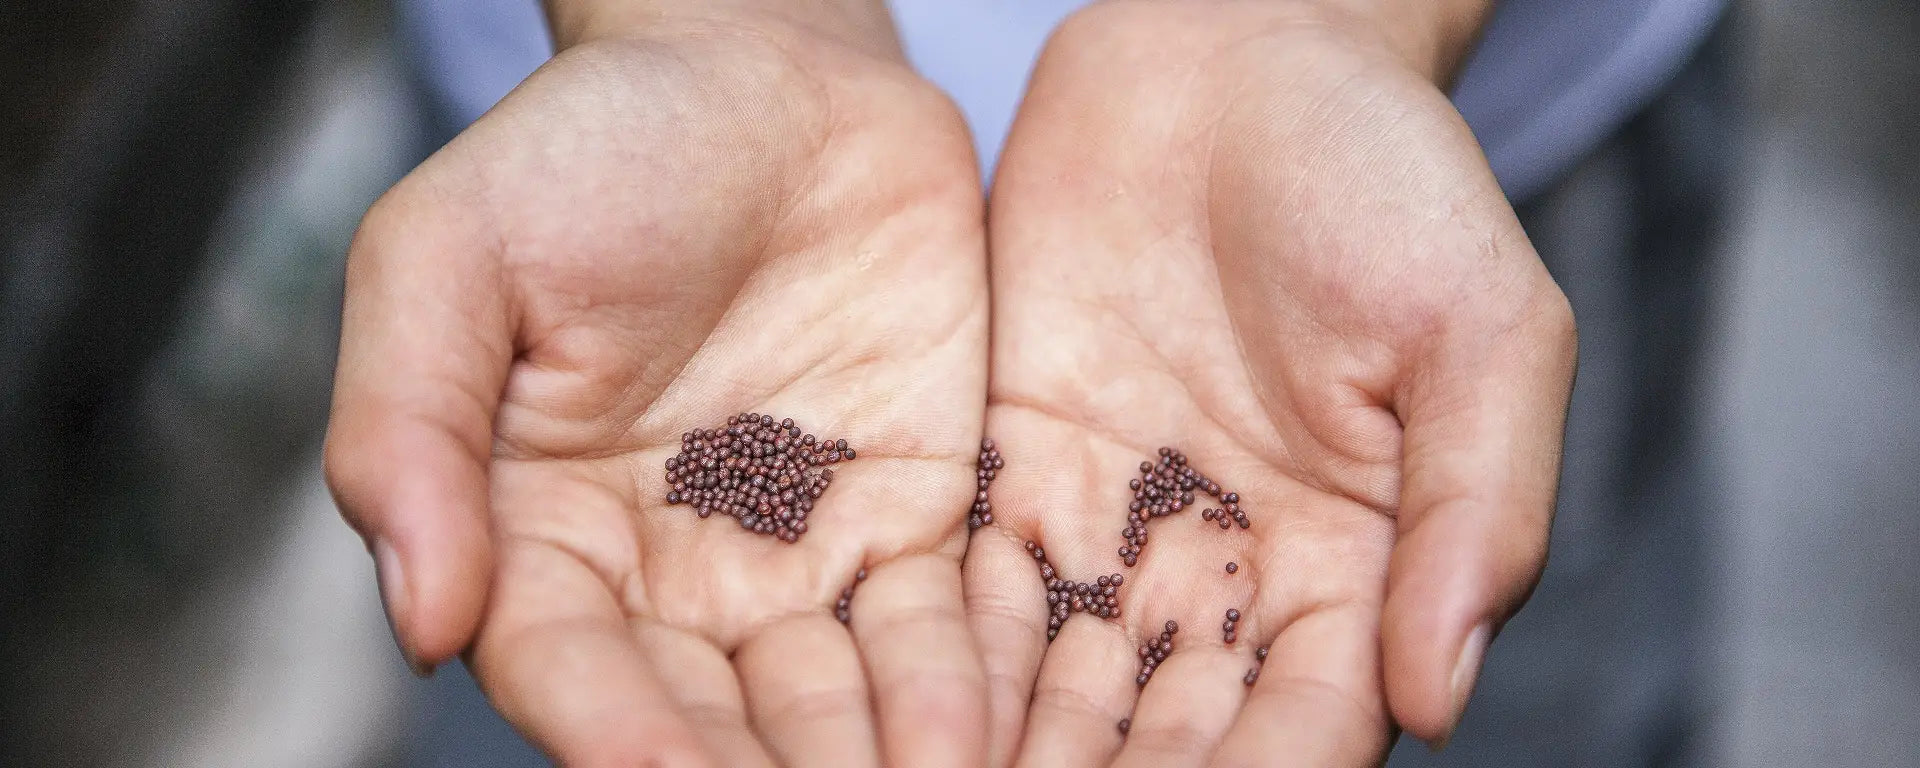 Organic Broccoli Sprouting Seeds in Hands